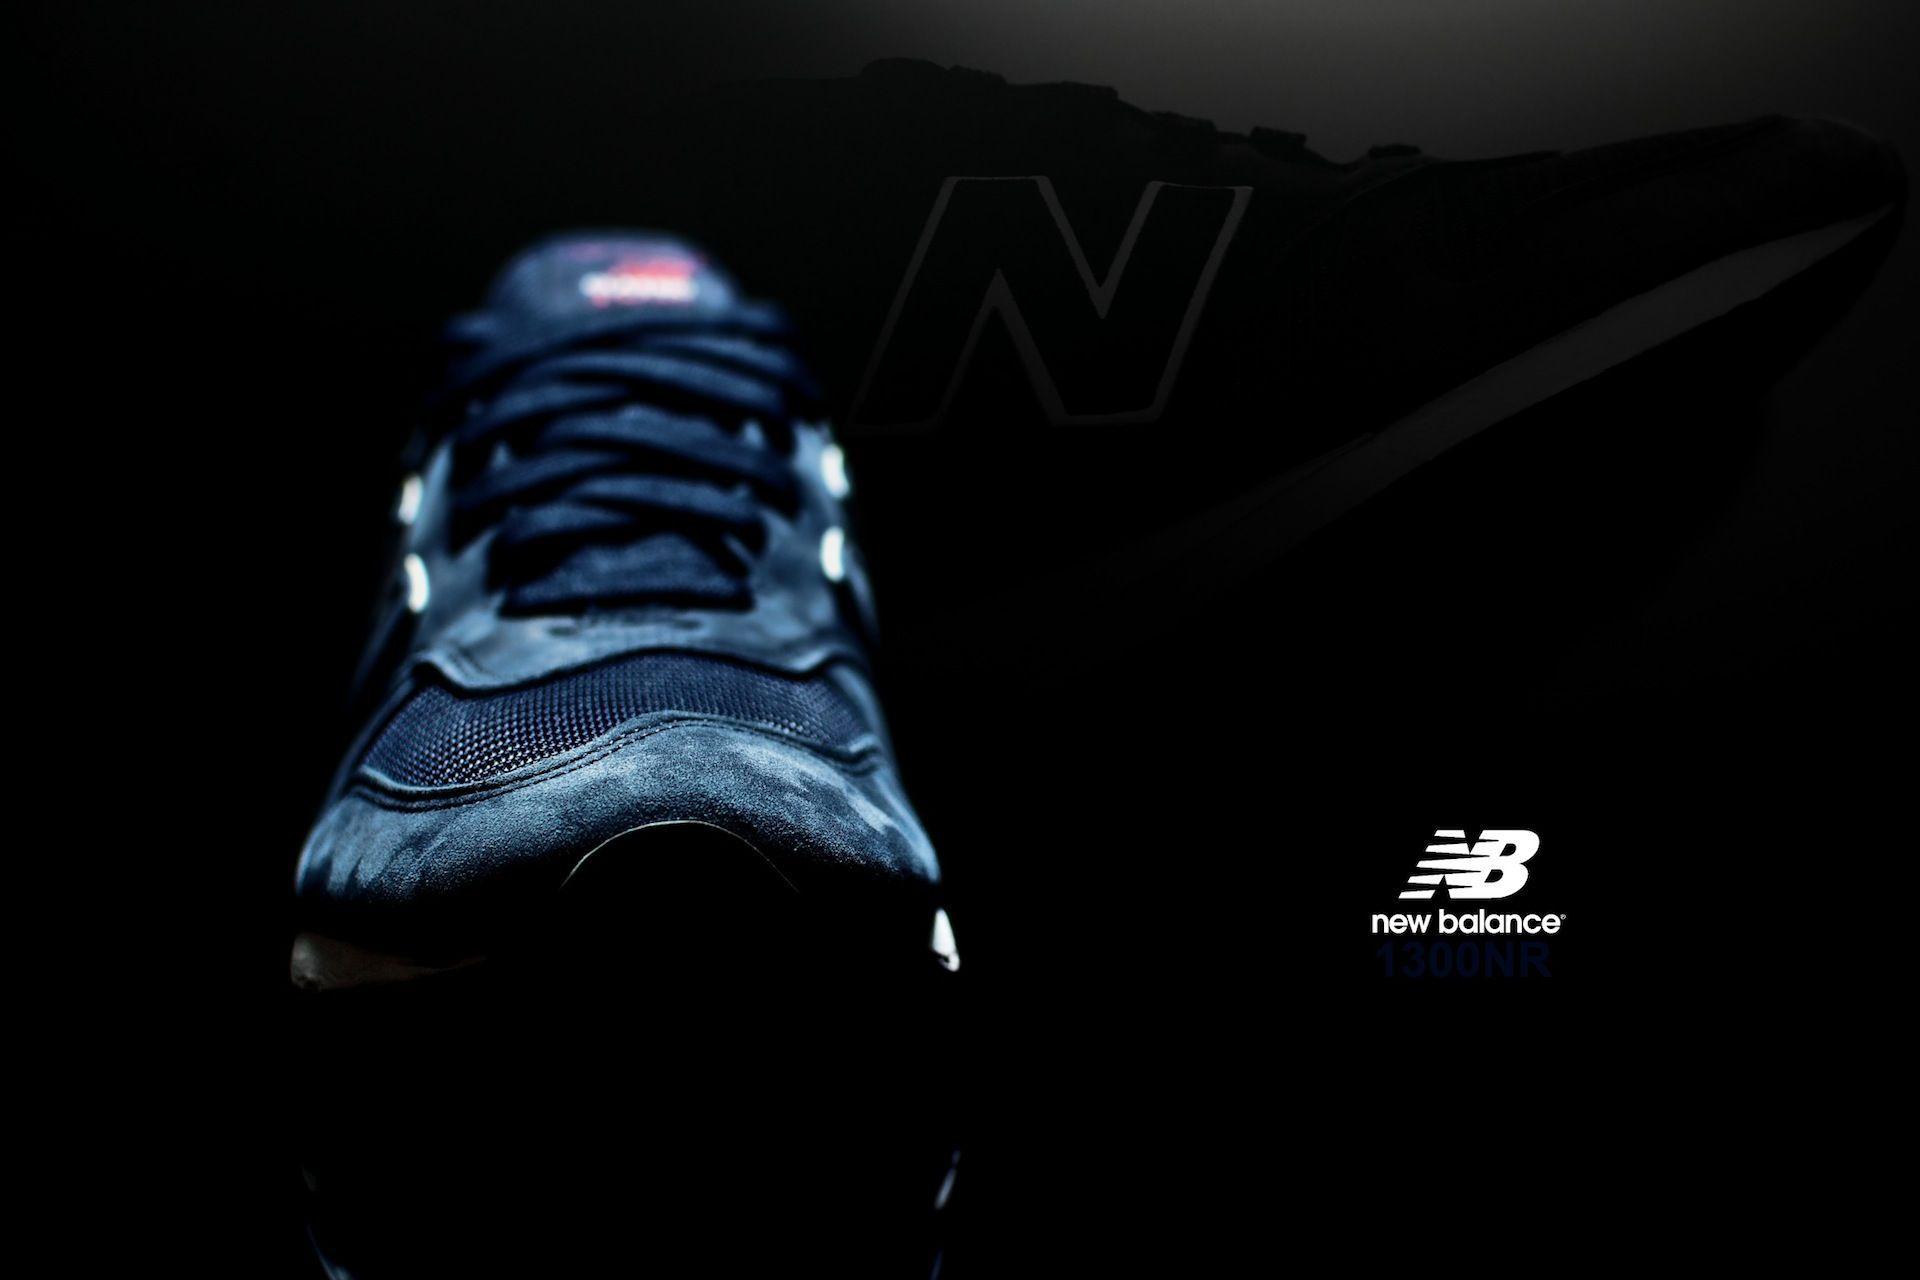 New Balance Quotes Wallpapers